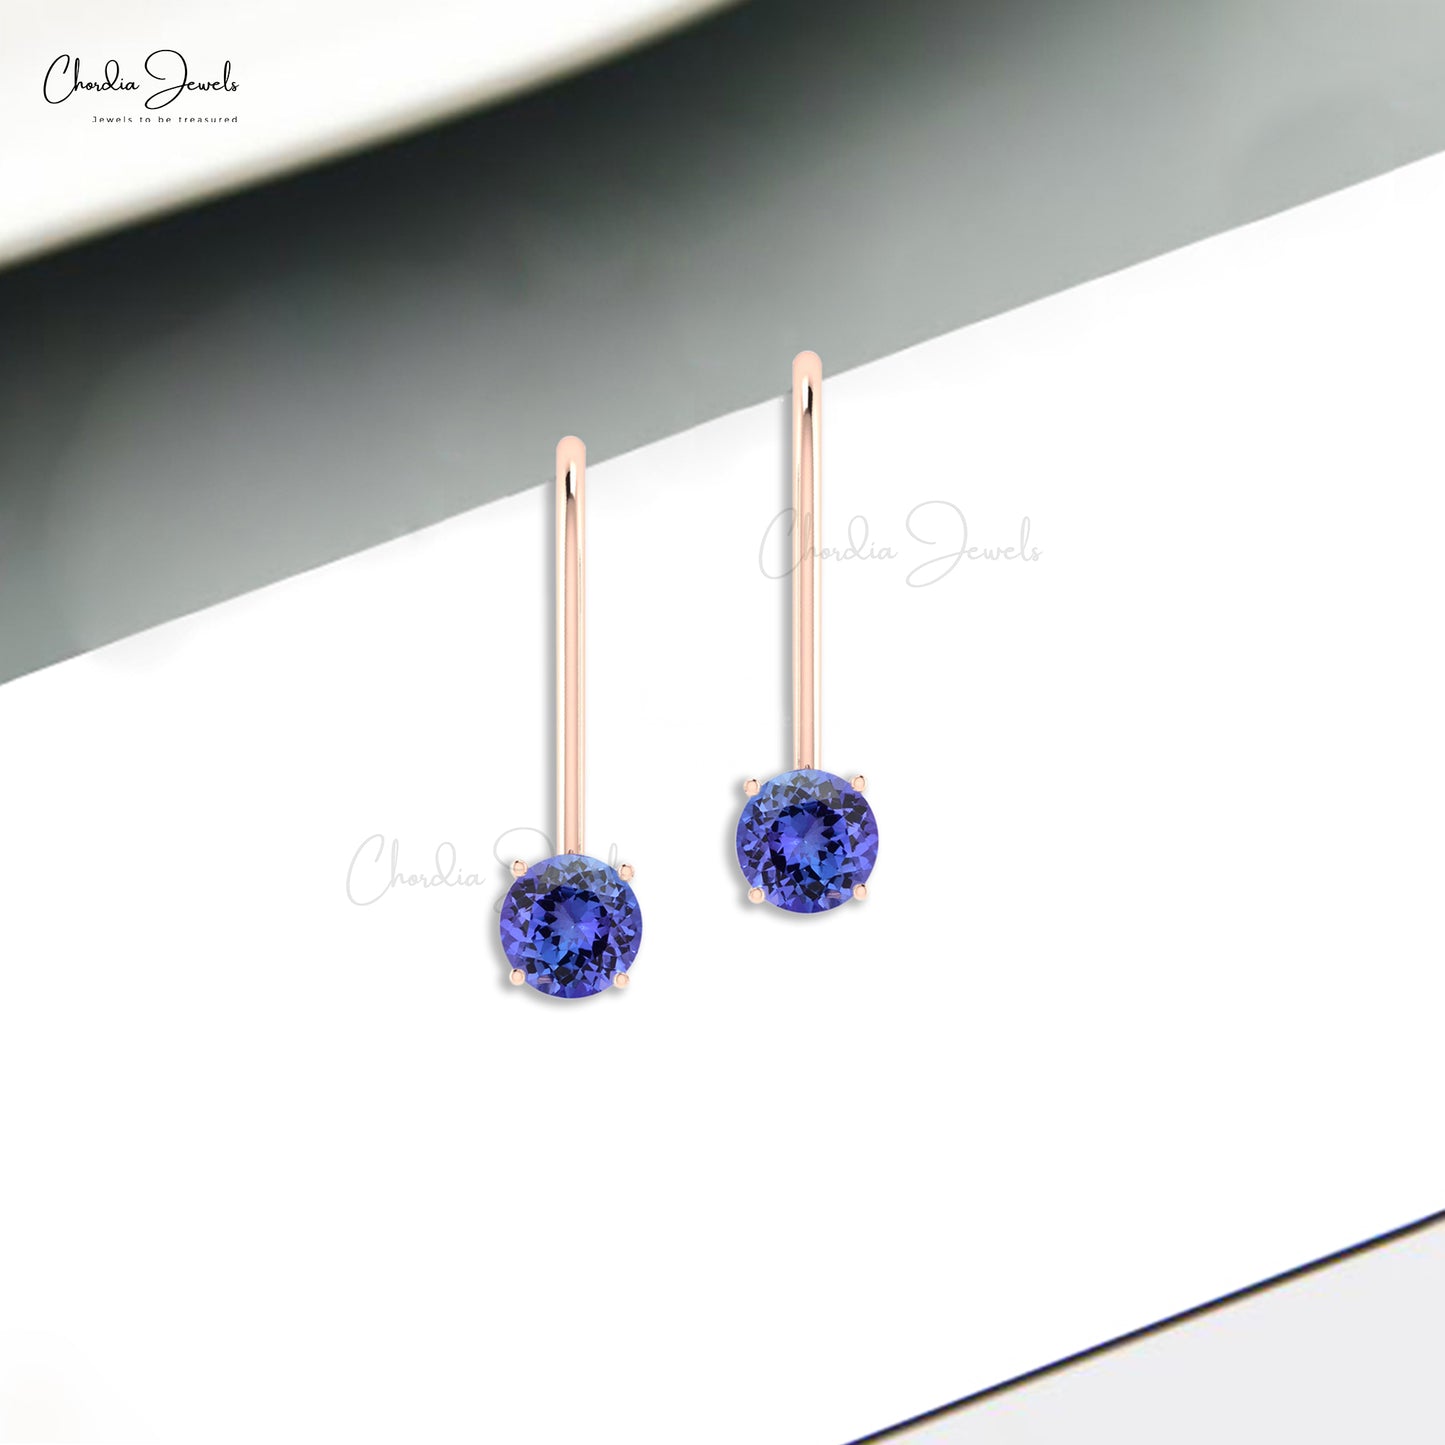 Load image into Gallery viewer, AAA Quality 0.98 Ct December Birthstone Gemstone Genuine Tanzanite Dangling Earrings 14k Solid Gold Prong Set Hallmarked Jewelry For Women
